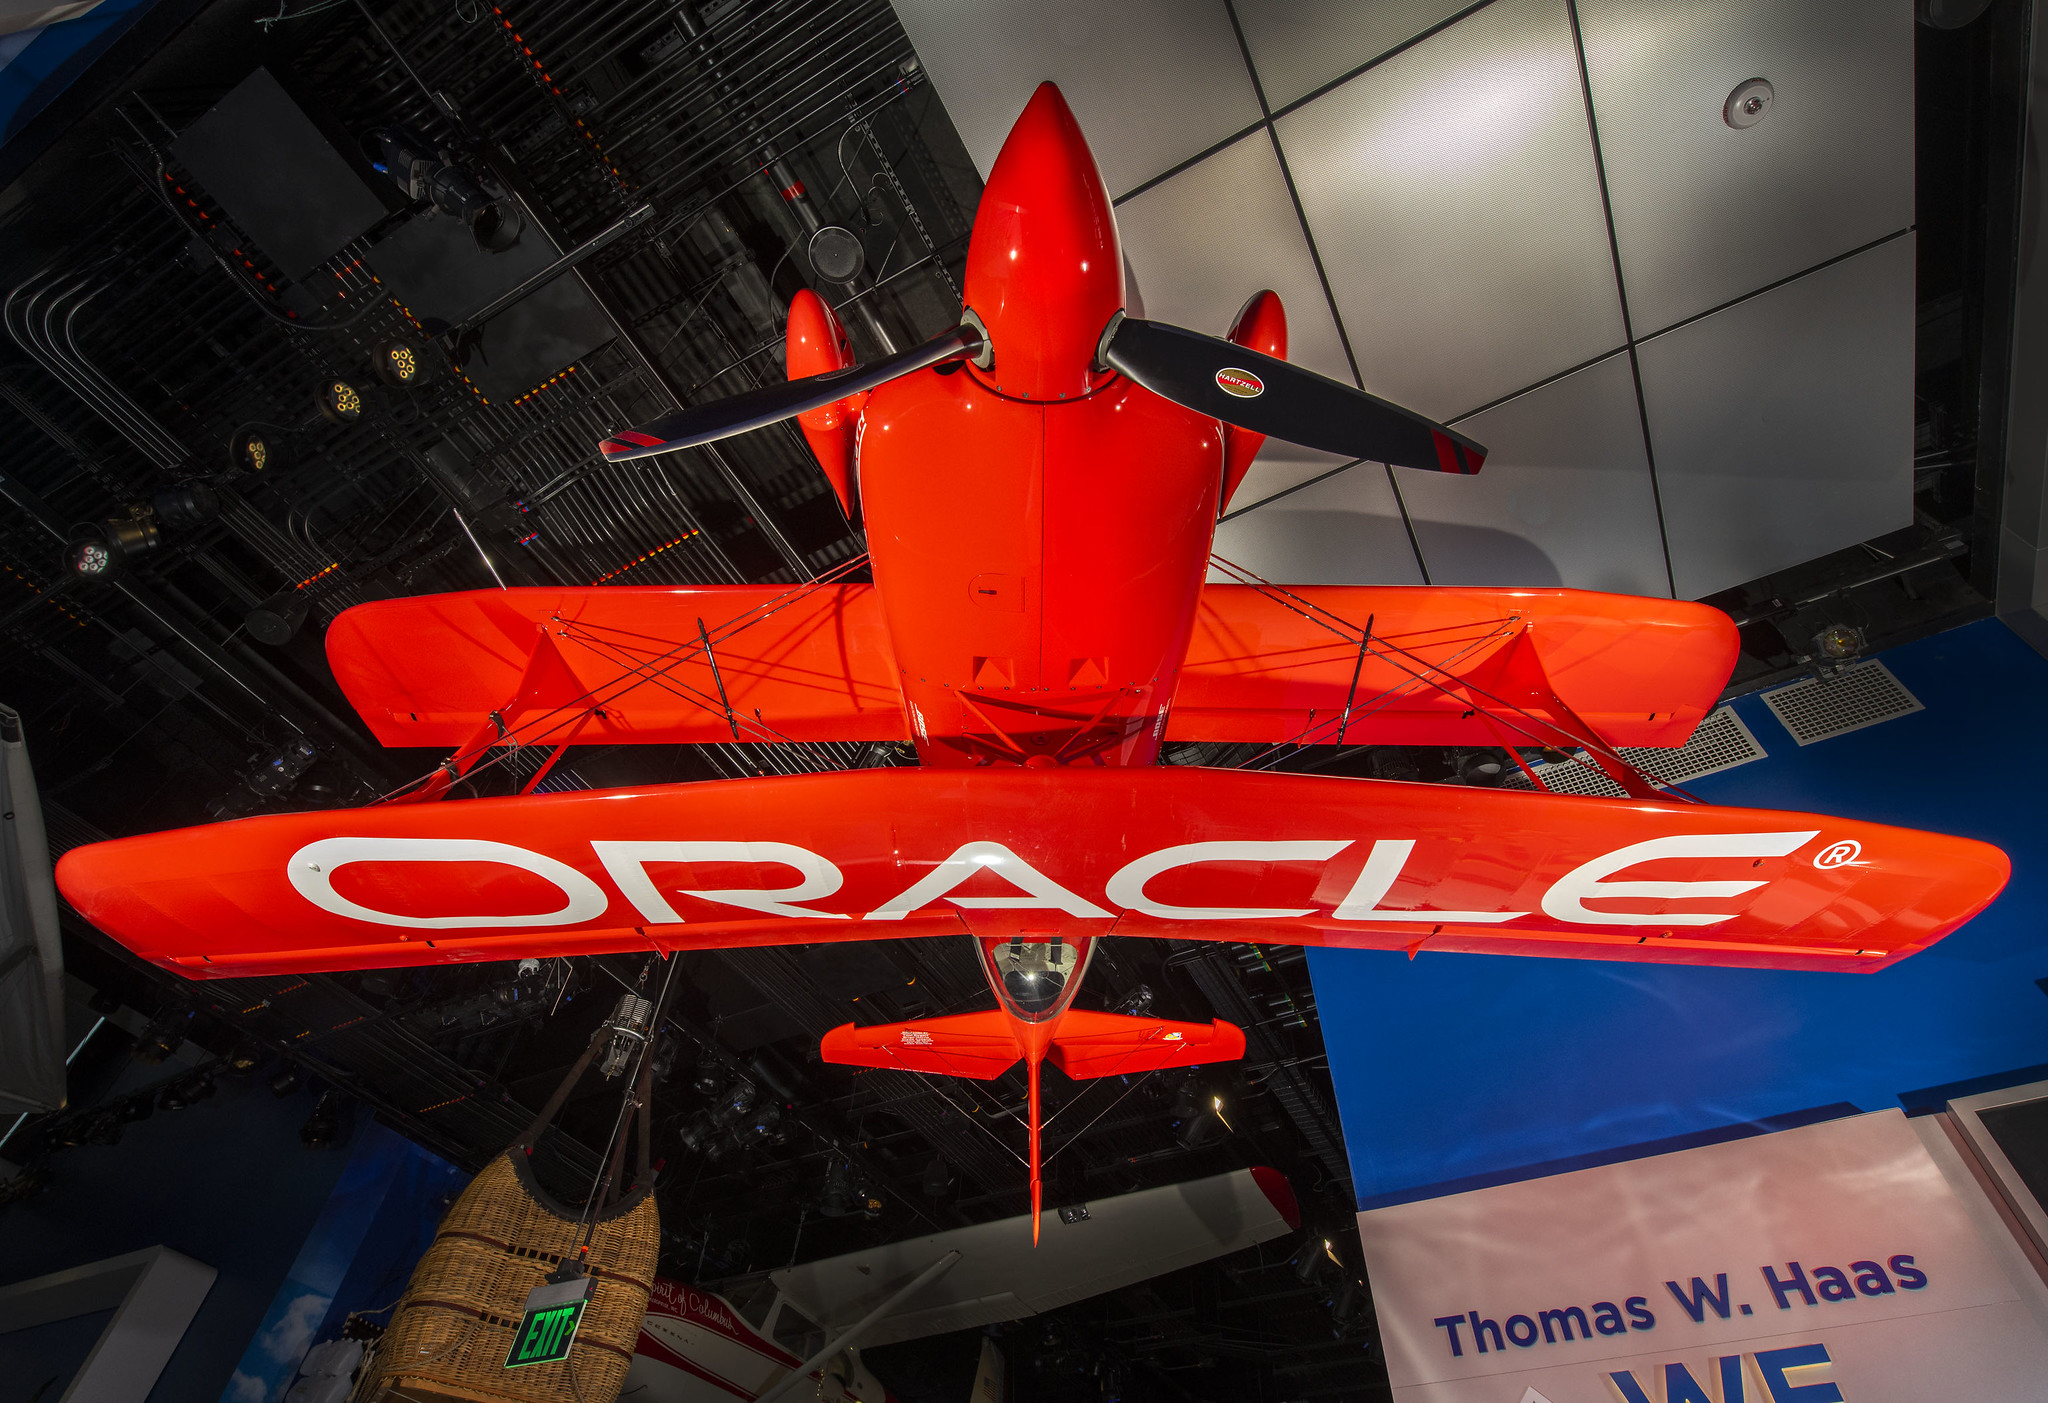 Bright red airplane with "Oracle" written on wings, hanging upside down